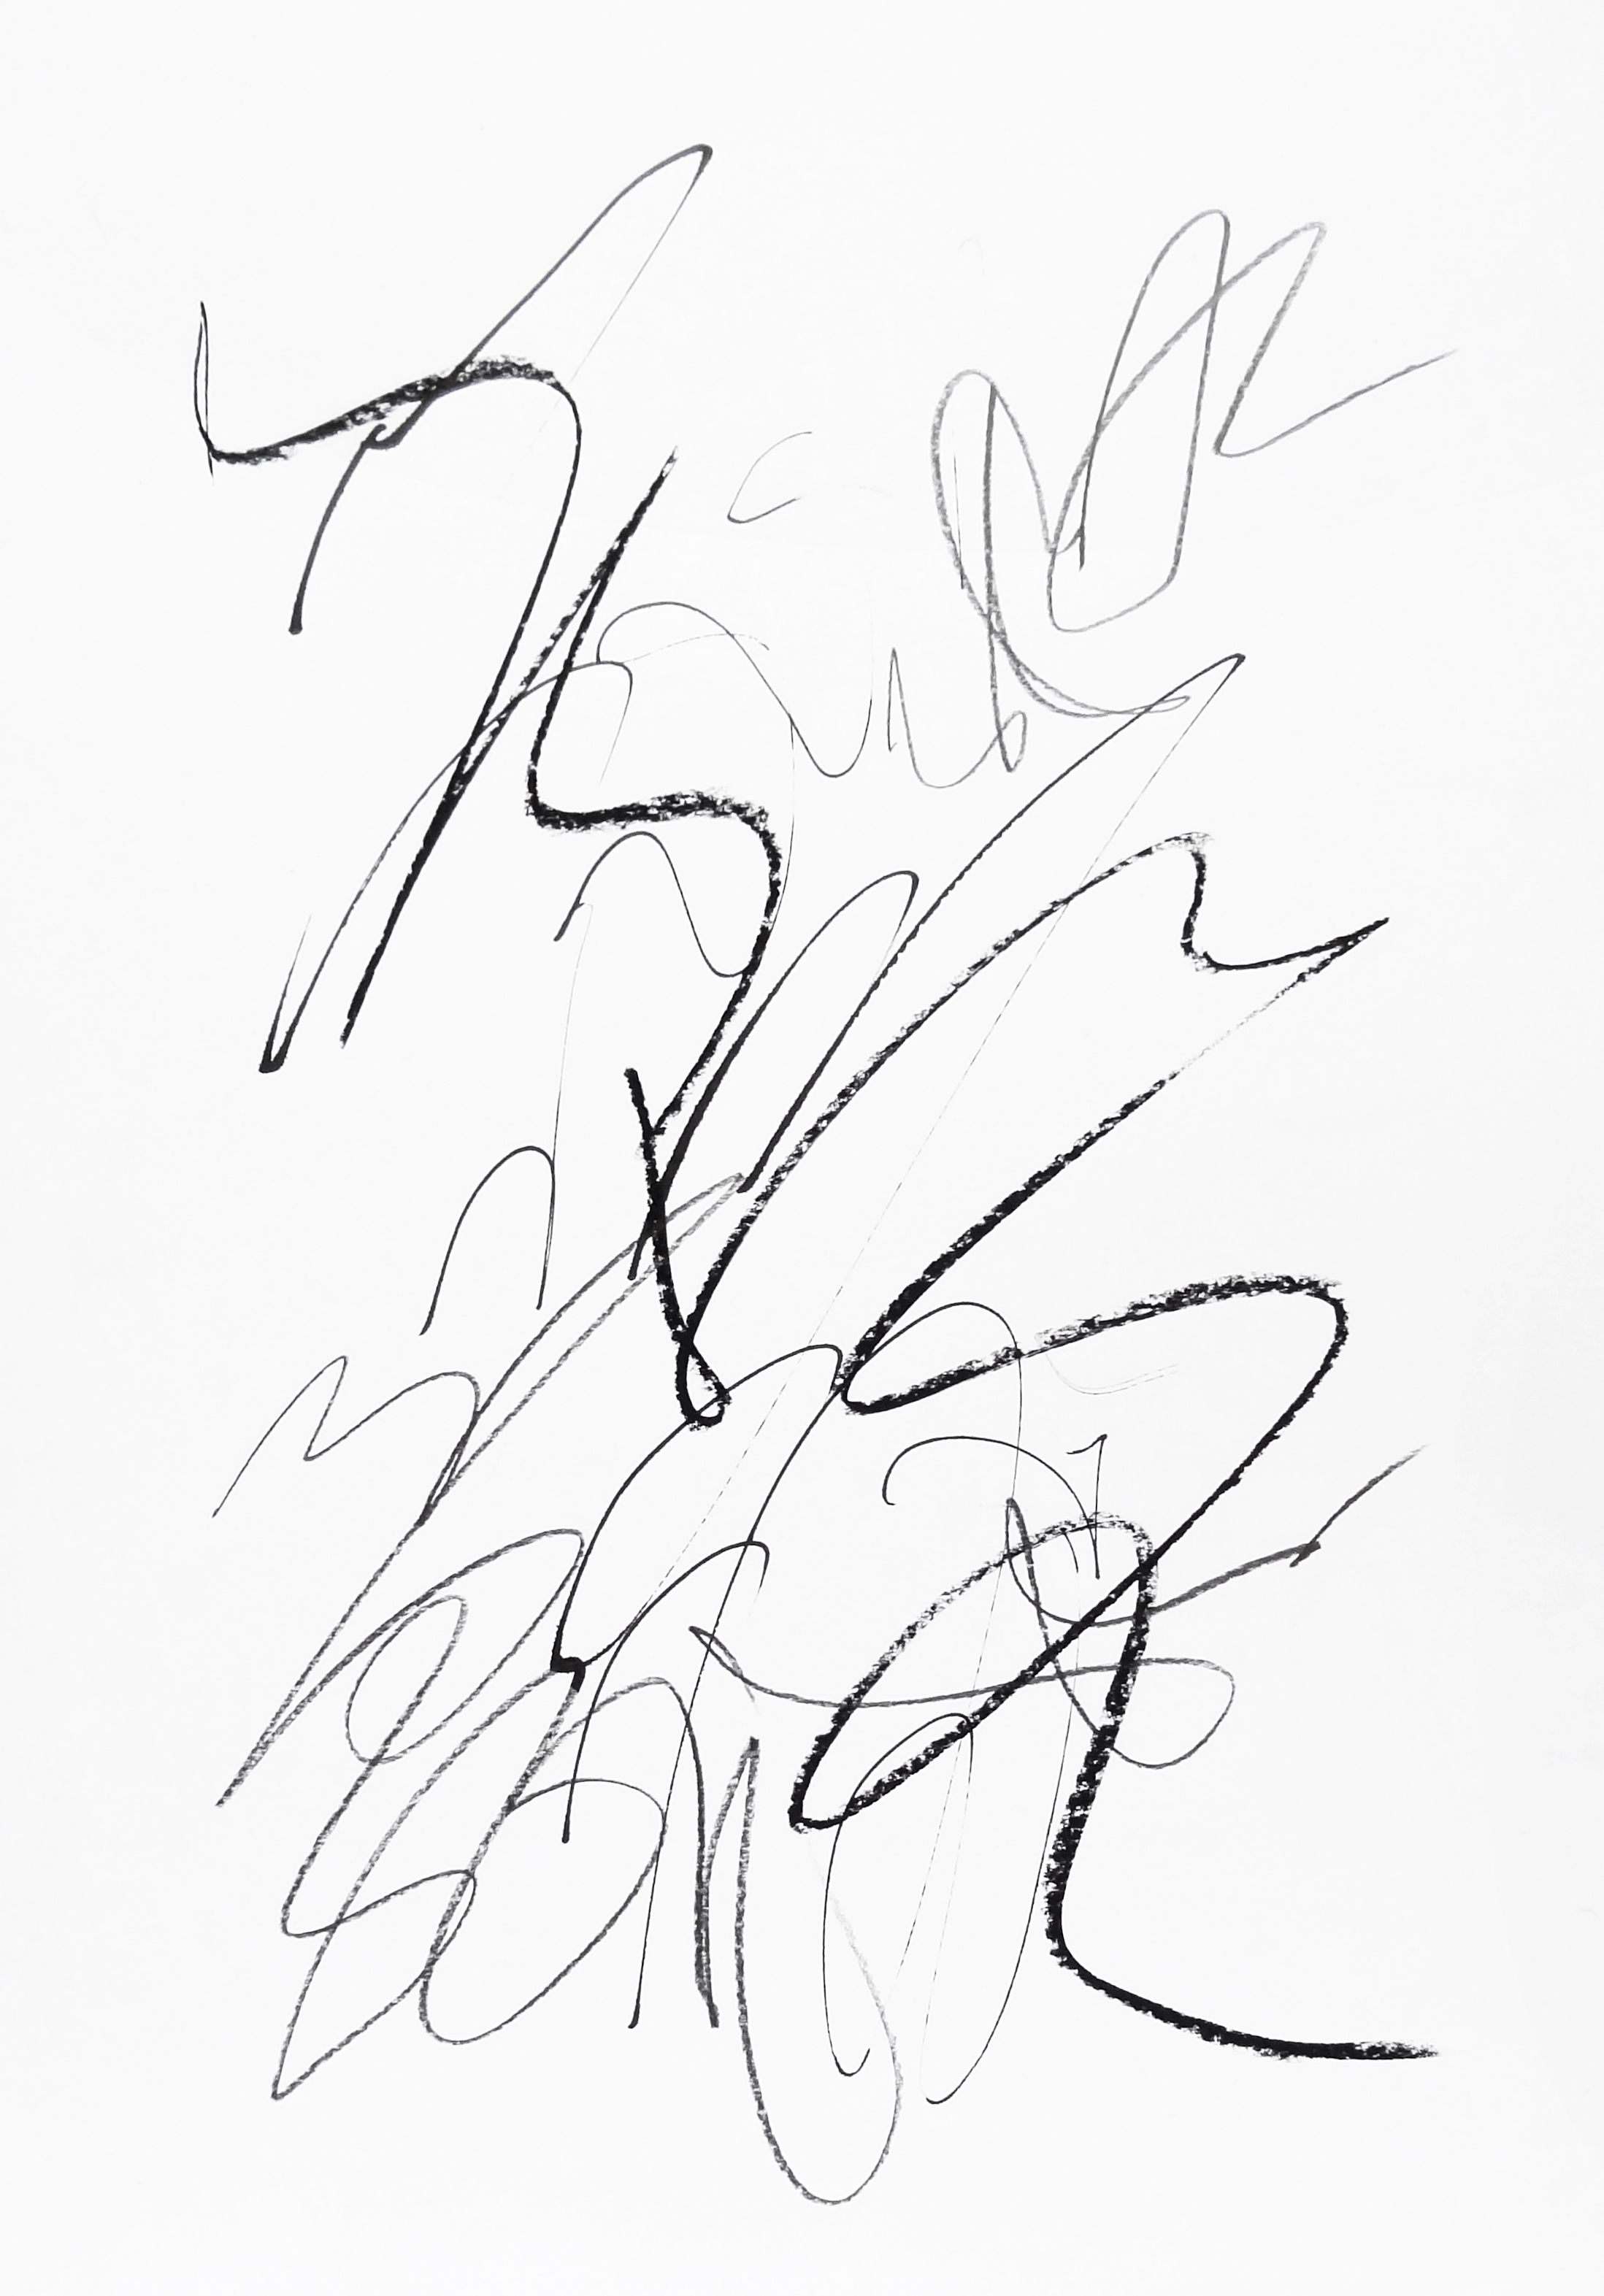  rhythm and flow studies, 2019 calligraphy ink, pencil and chalk on paper 42,0 x 29,7 cm (12-19) 